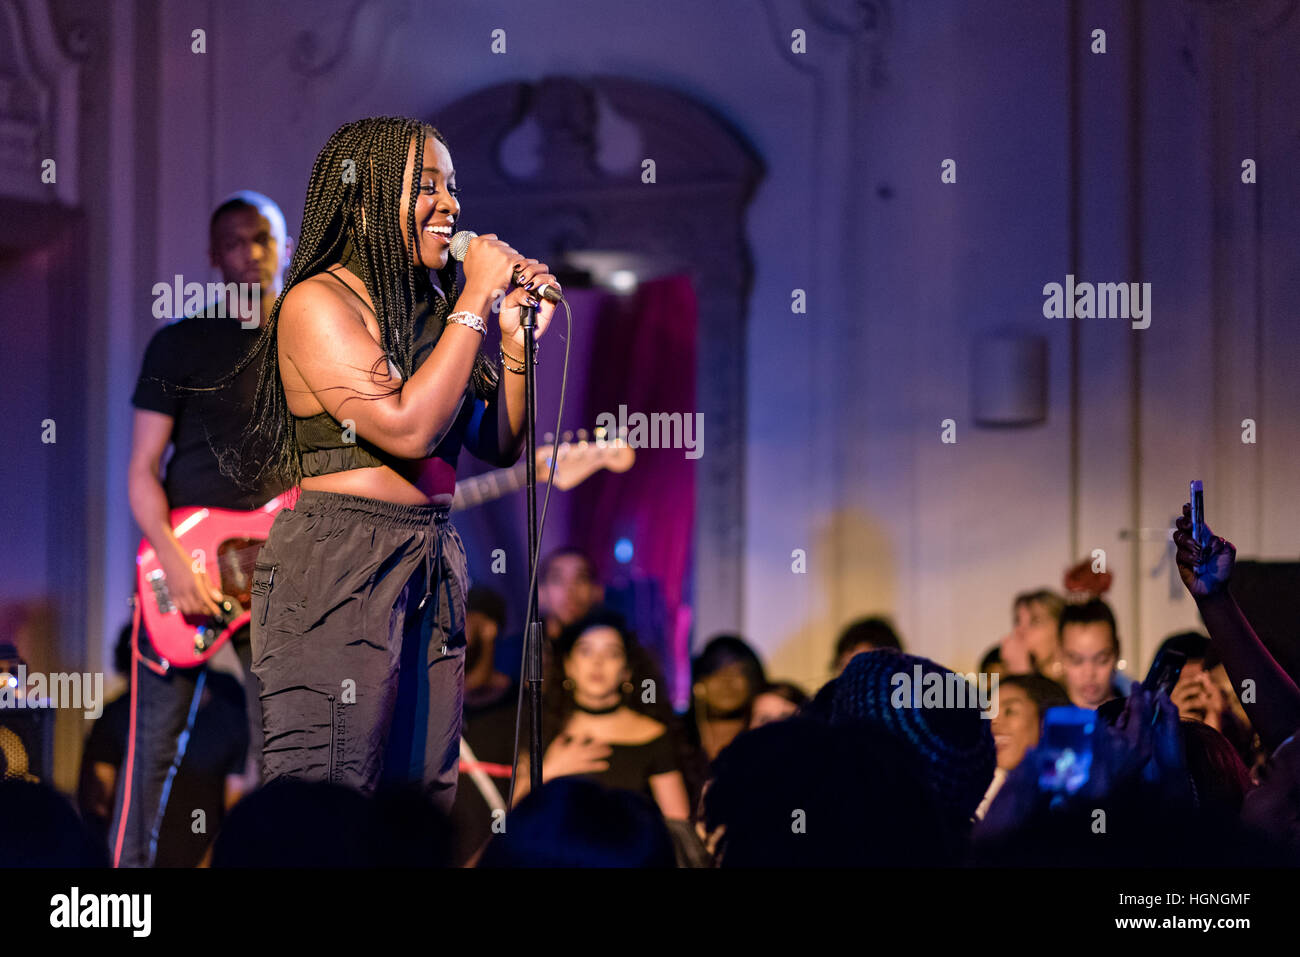 Ray BLK interacting with the audience at a live concert in September 2016 Stock Photo